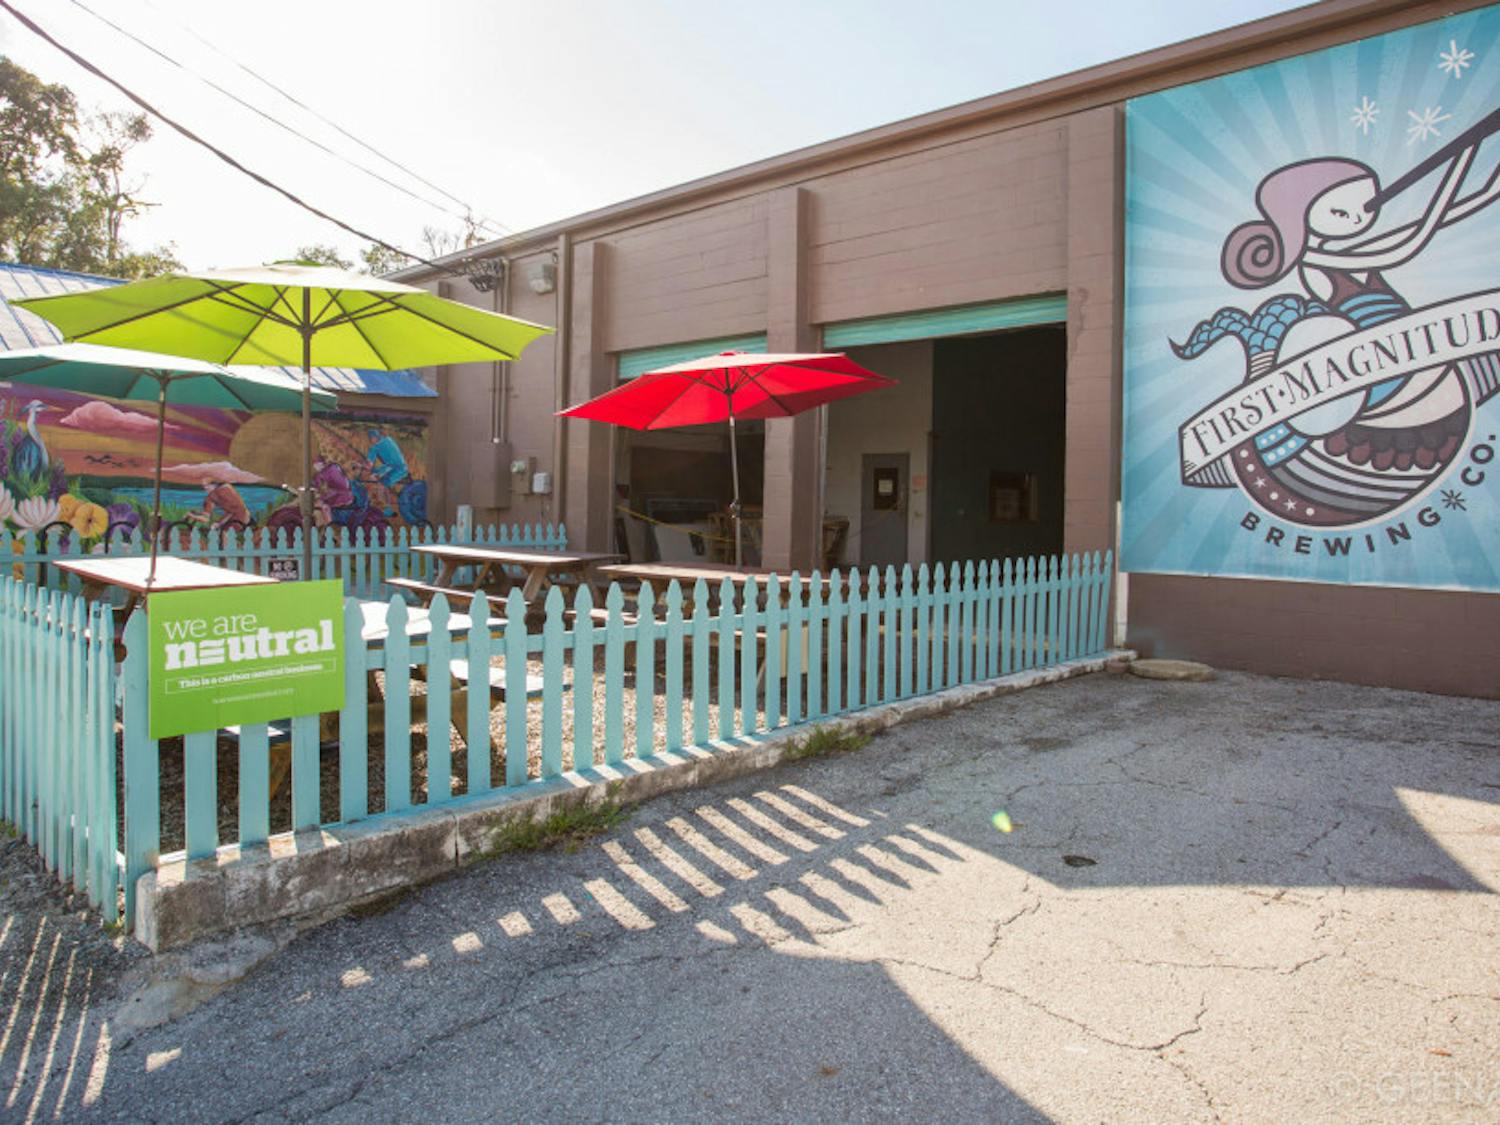 Located just south of Depot Park at 1220 SE Veitch St., First Magnitude Brewing Company creates delicious beer while giving back to the community.